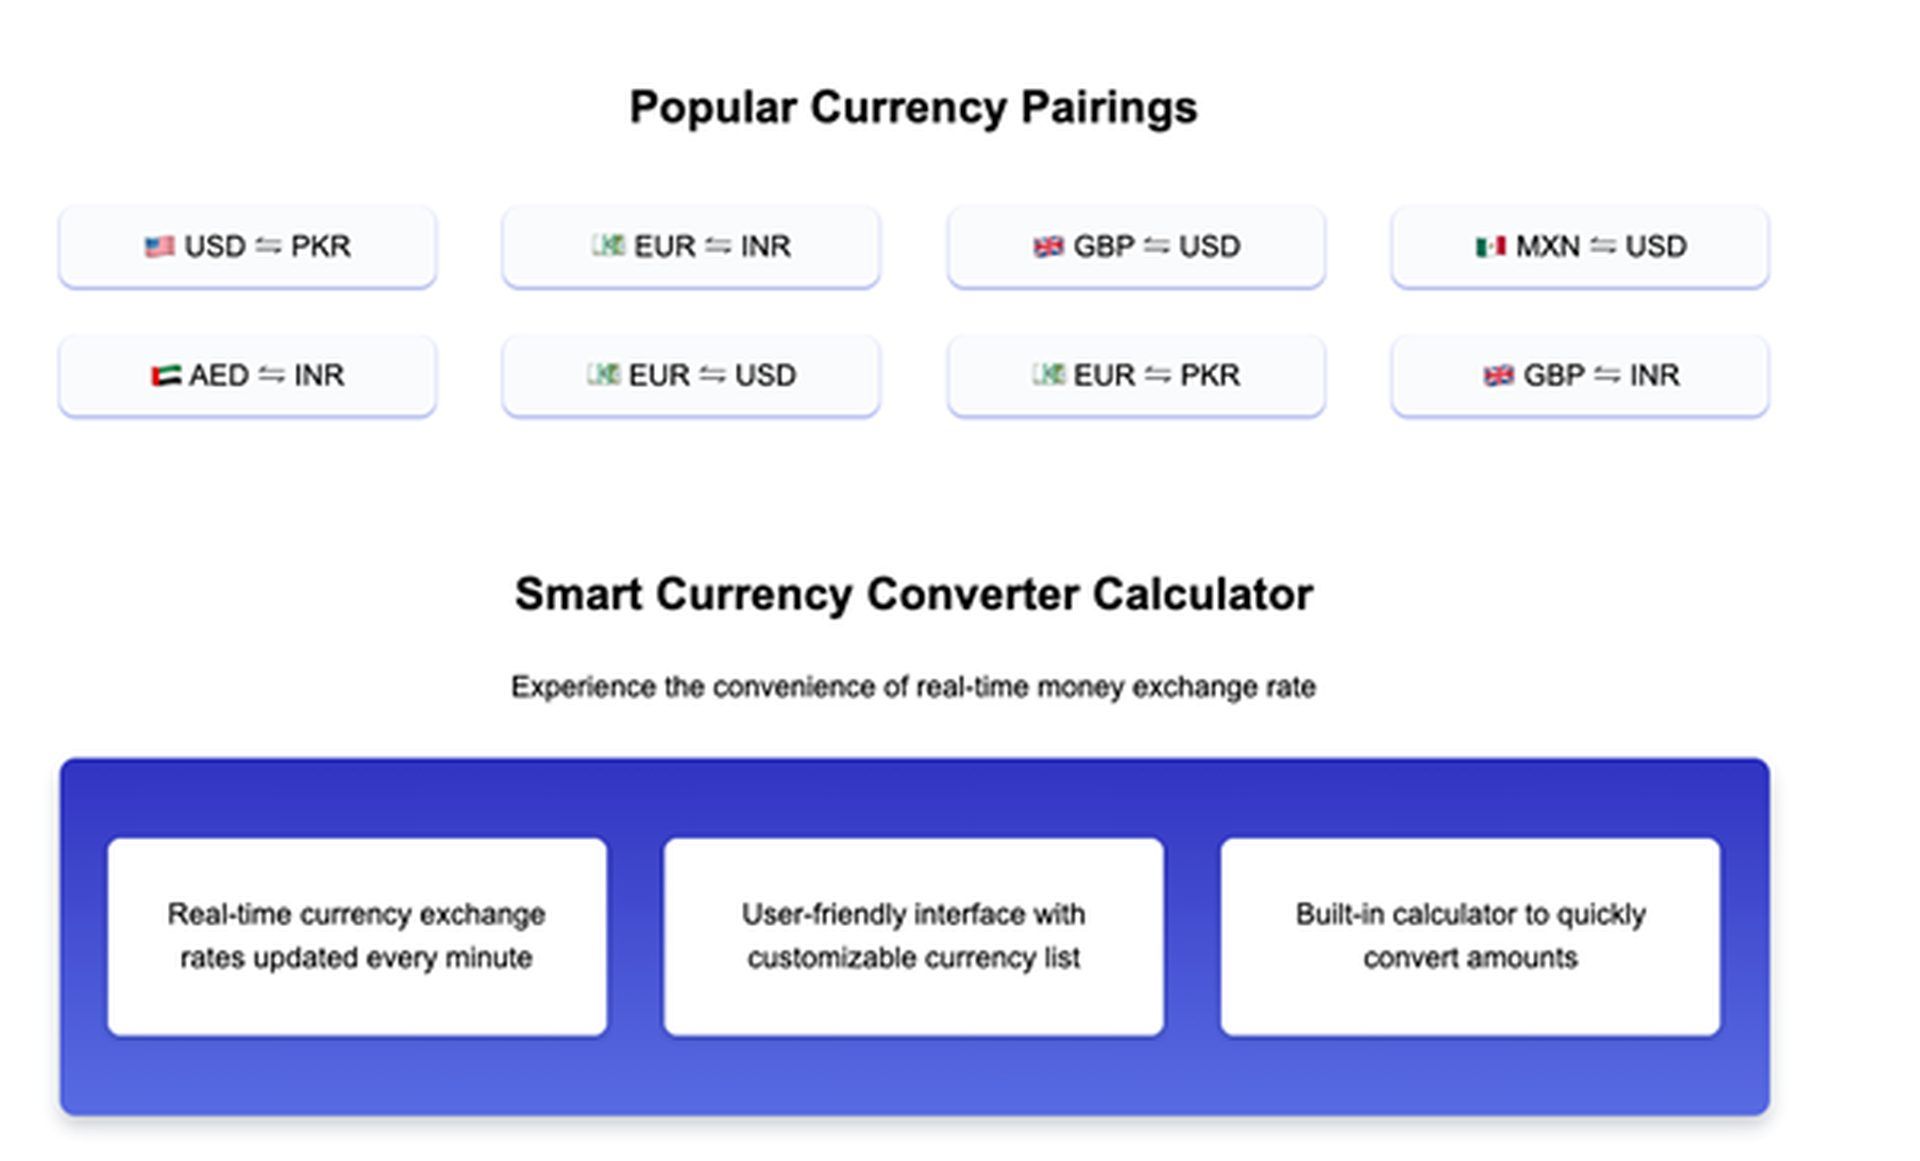 50 USD to PKR: Navigating Currency Conversion - insightsearching